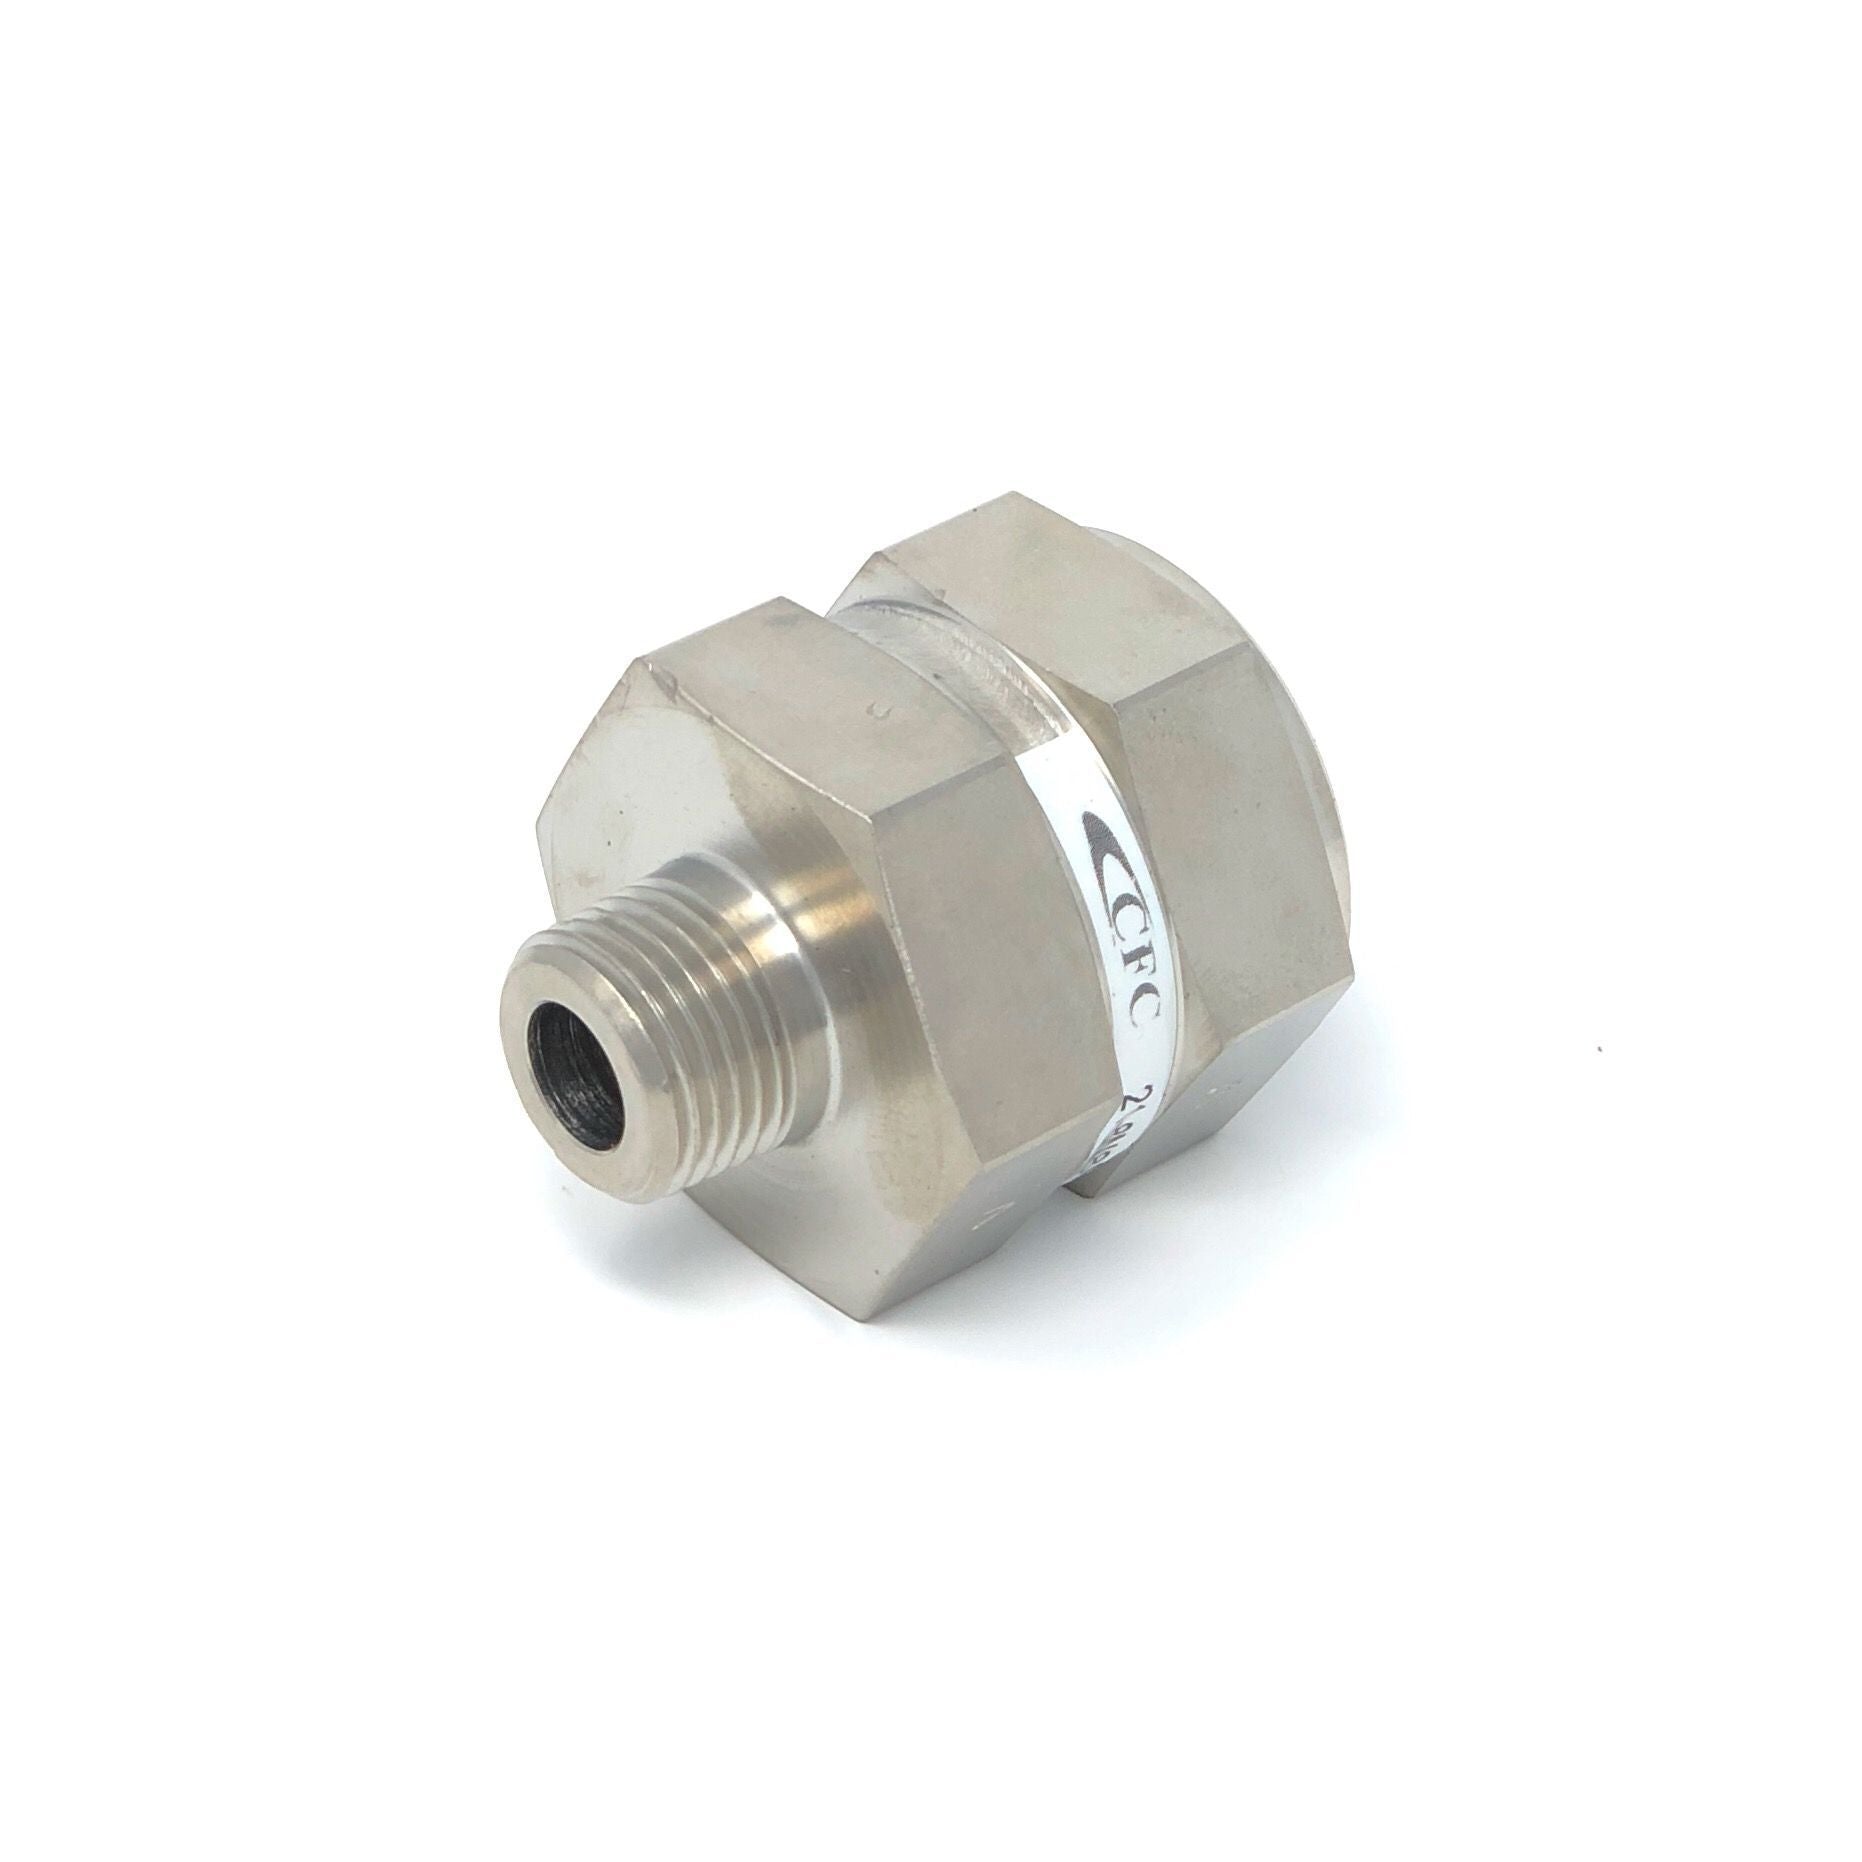 21-6T6T-18S : Chase High Pressure Inline Filter, 6000psi, 3/8" 37 Degree Flare , 18 Micron, No Visual Indicator, No Bypass